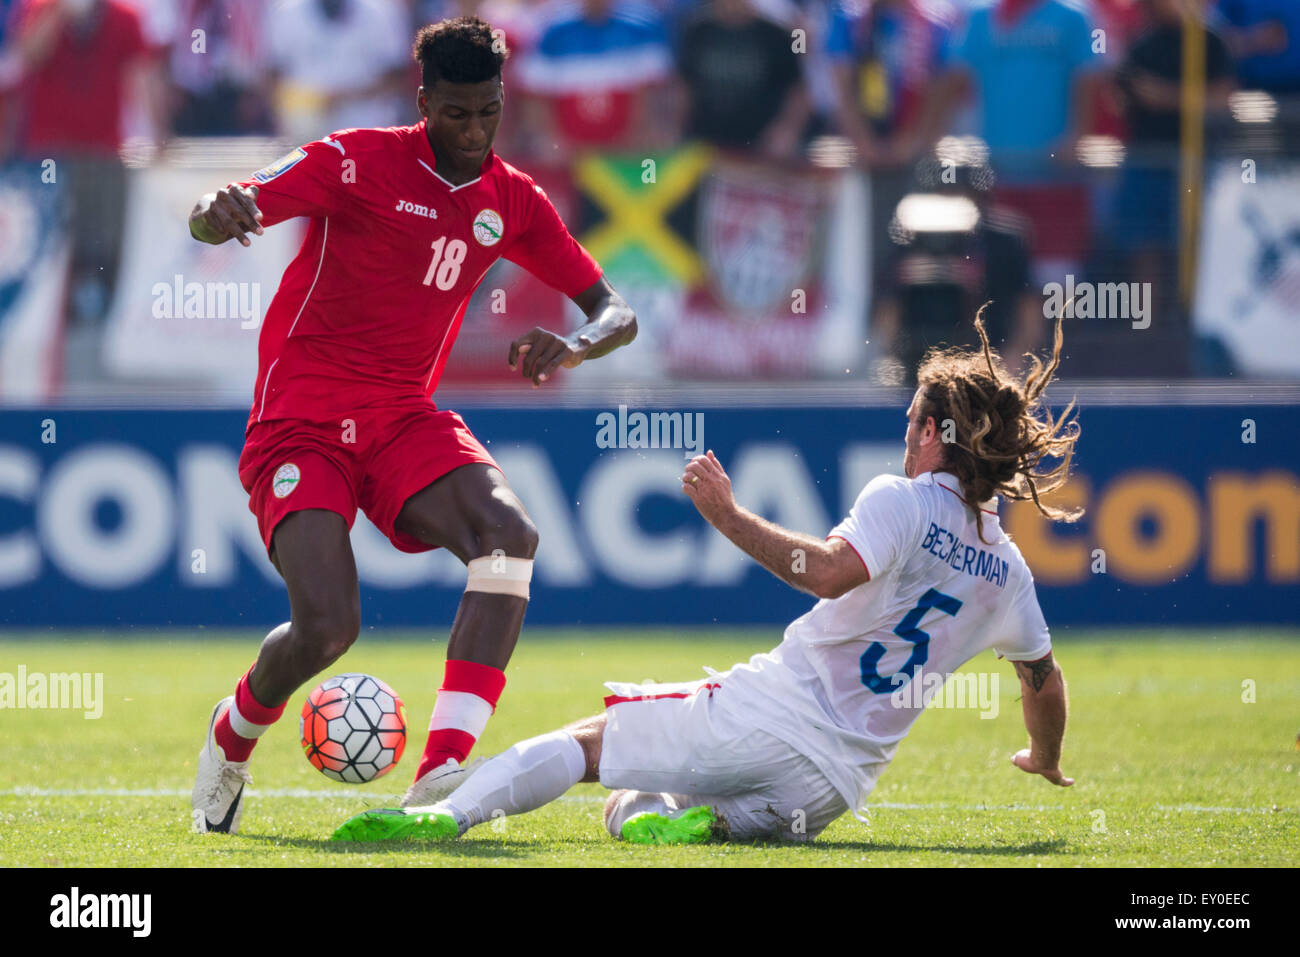 Baltimore, Maryland, USA. 18th July, 2015. #5 USA M Kyle Beckerman makes a slide tackle during the CONCACAF Gold Cup quarterfinal match between USA and Cuba at M&T Bank Stadium in Baltimore, MD. Jacob Kupferman/CSM/Alamy Live News Stock Photo